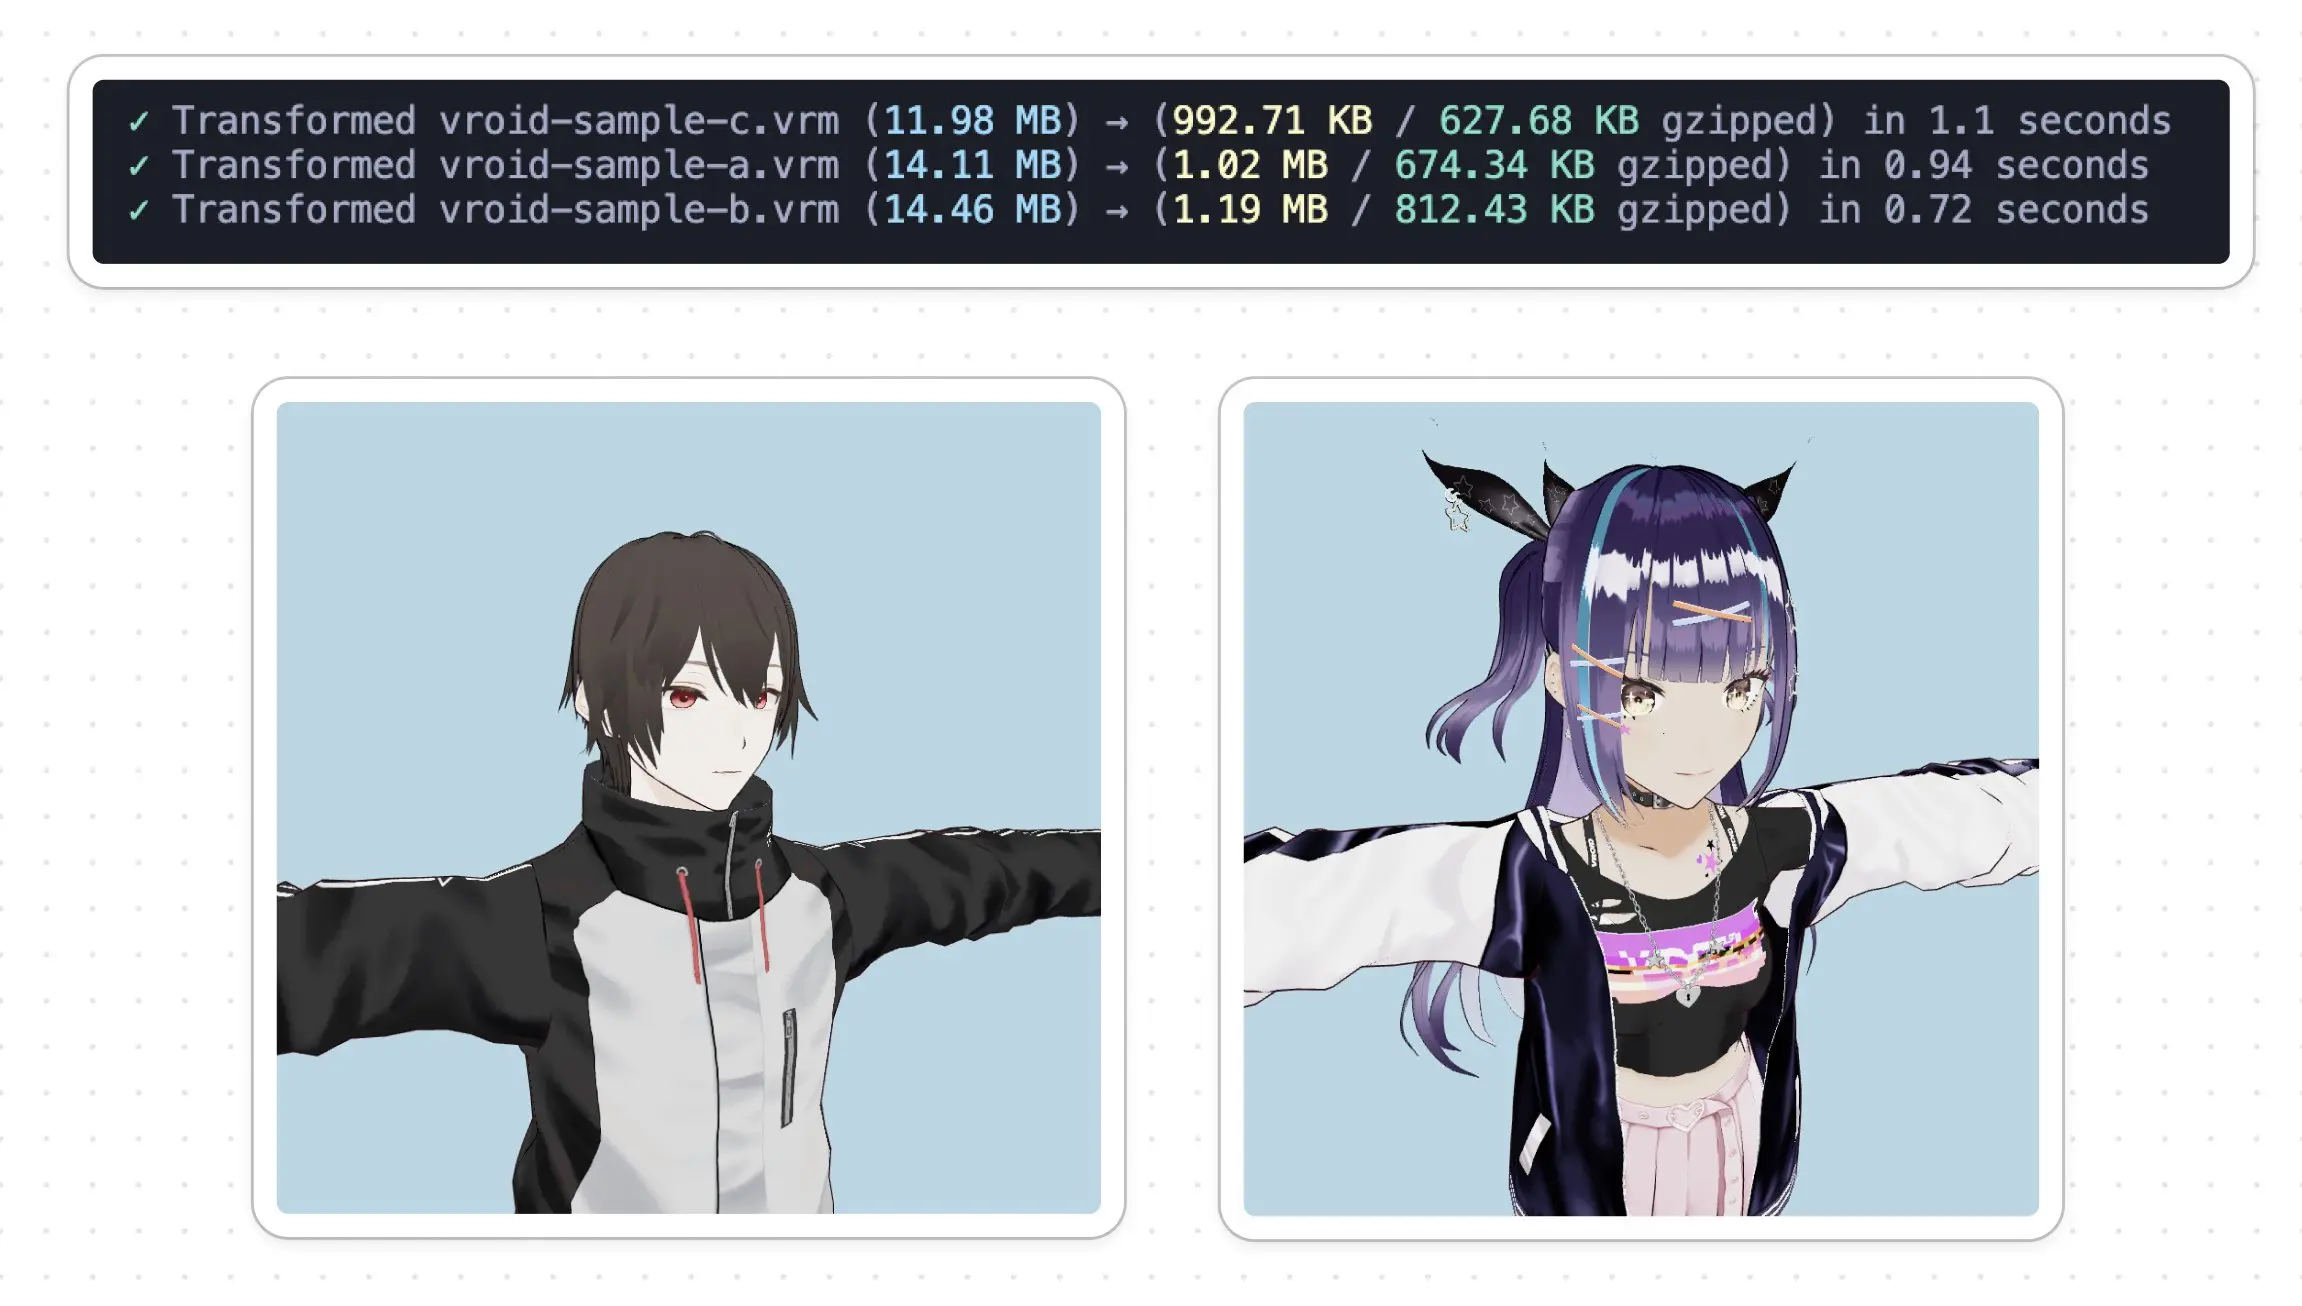 Top: terminal logs showing showing three VRoid VRM files that have shrunk from 15 MB to 1 MB. Bottom: two compressed VRoid characters in T-Pose. Compression artifacts are minimal.